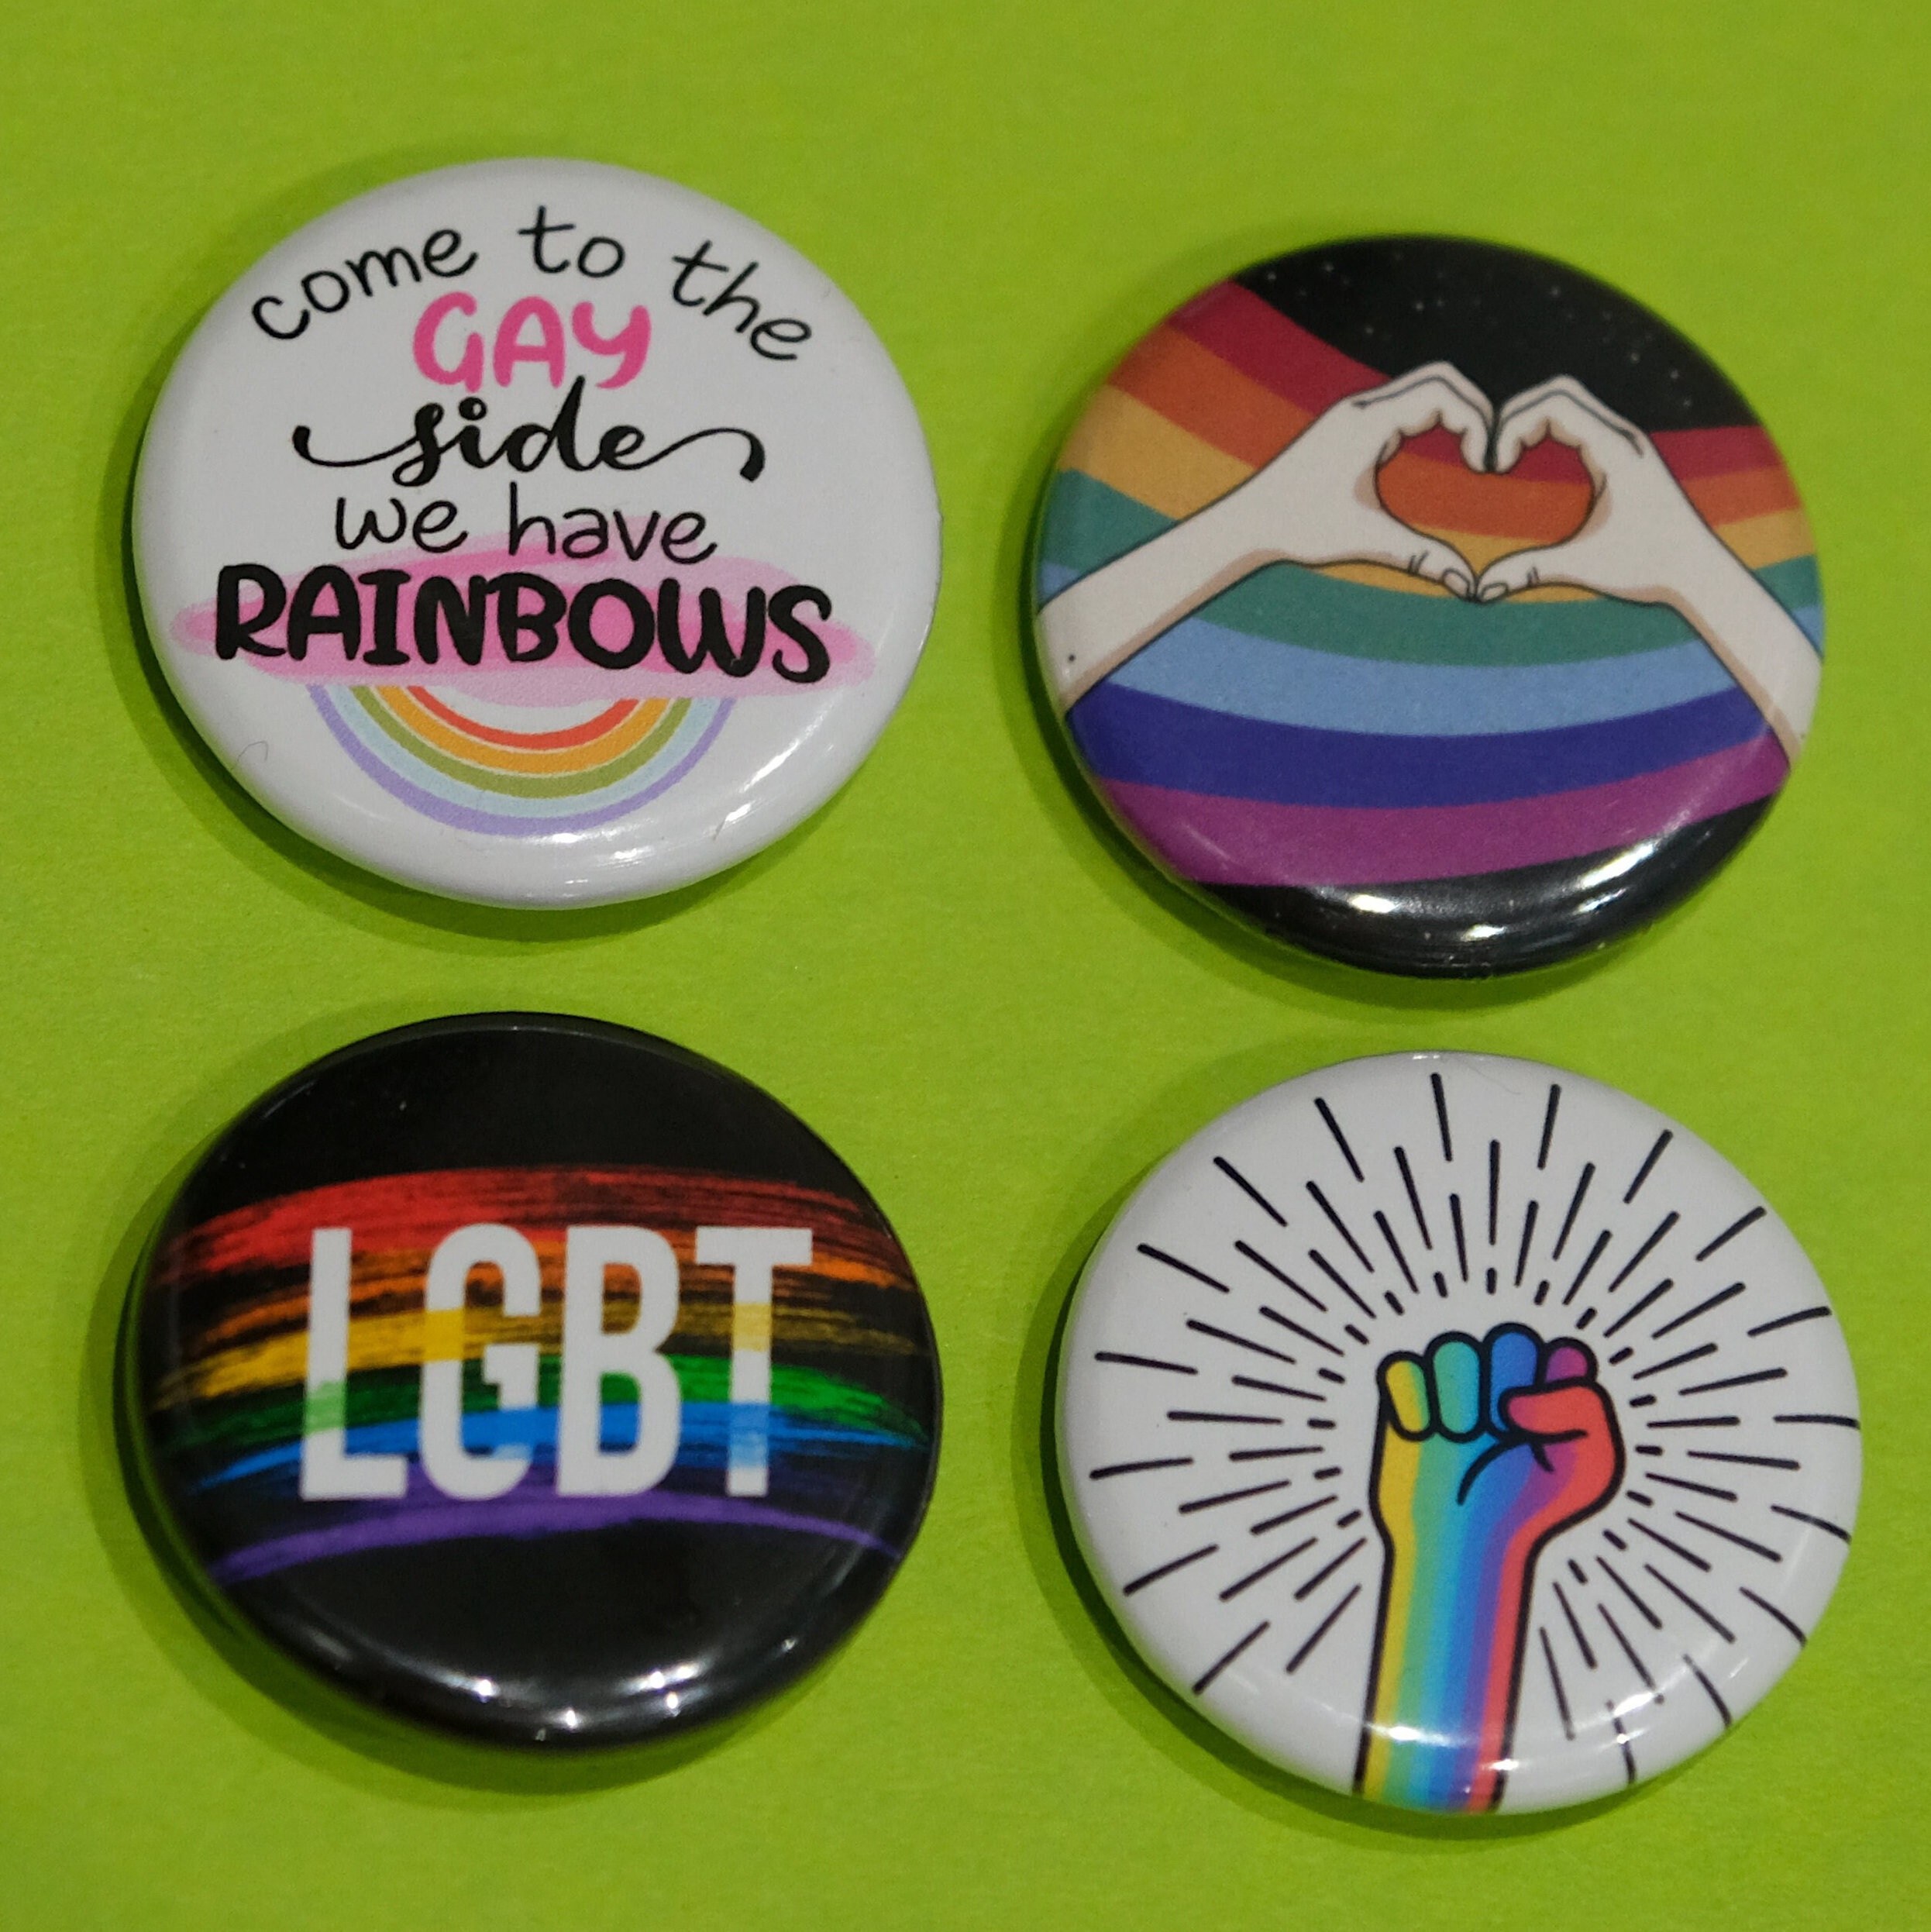 Size is 1inch/25mm diameter RAINBOW BADGE BUTTON PIN LGBT GAY PRIDE DIVERSITY PEACE by Pin It On 